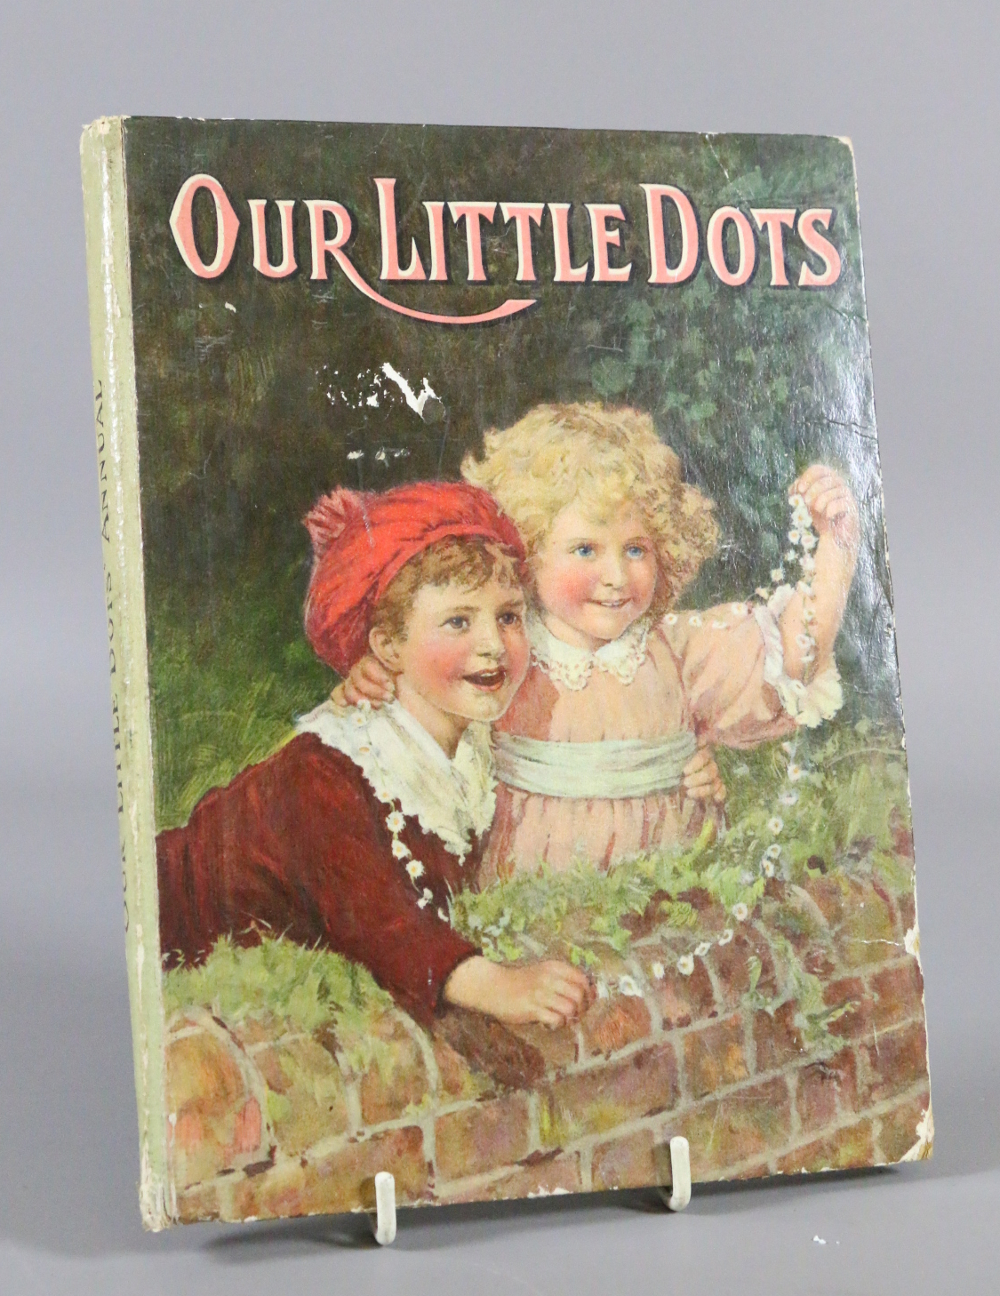 A bound copy 'Our Little Dots' thirty si